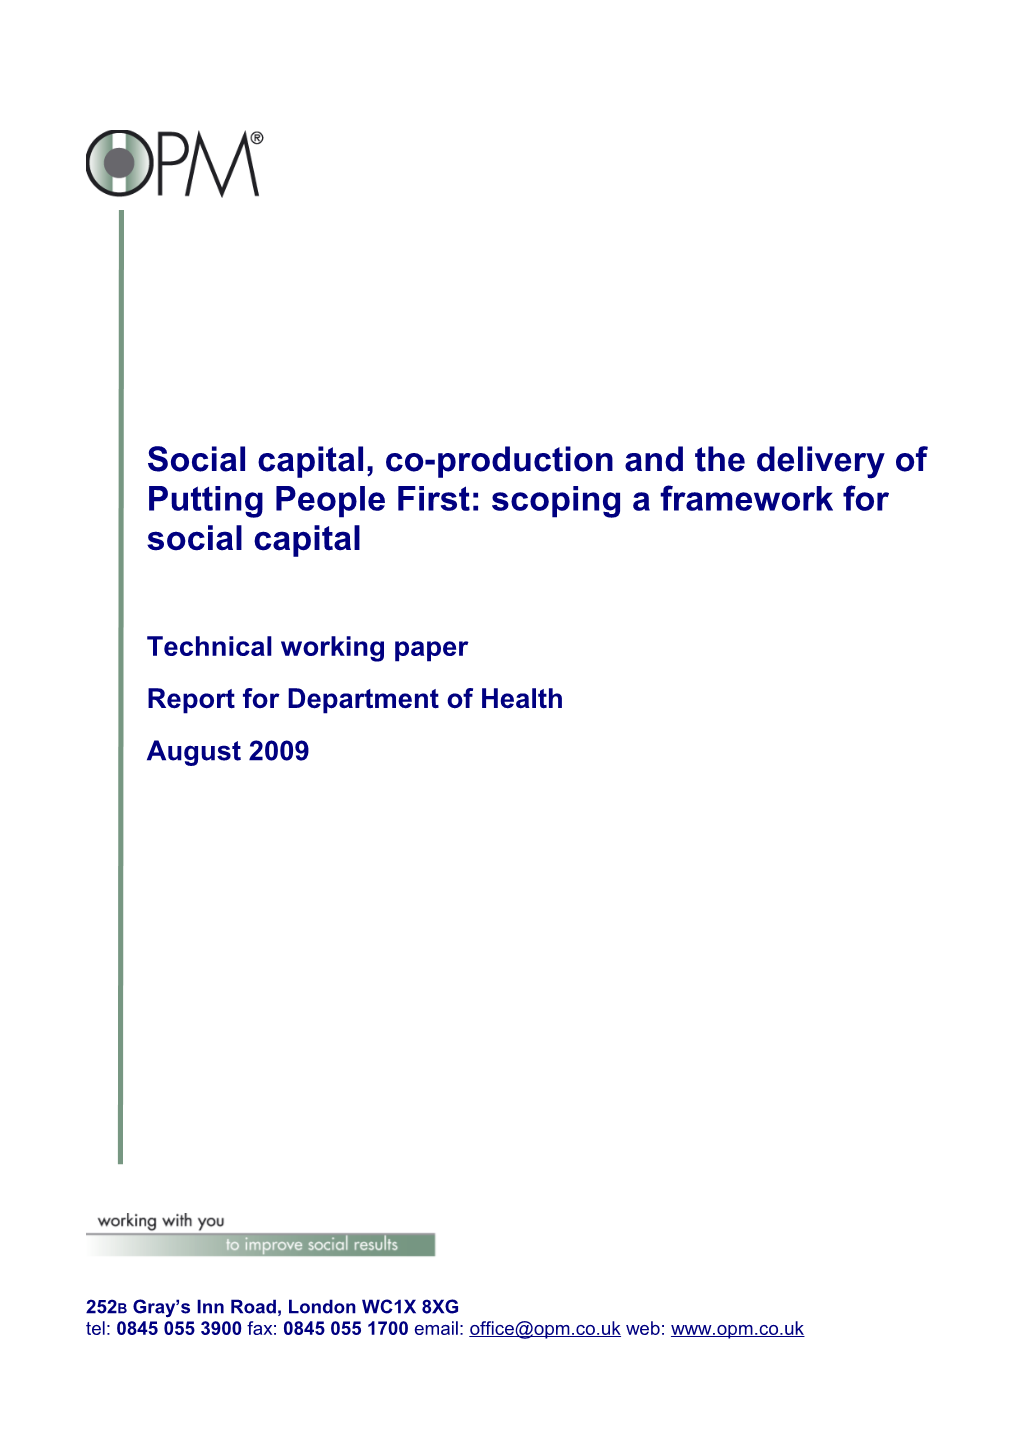 Social Capital, Co-Production and the Delivery of Putting People First: Scoping a Framework